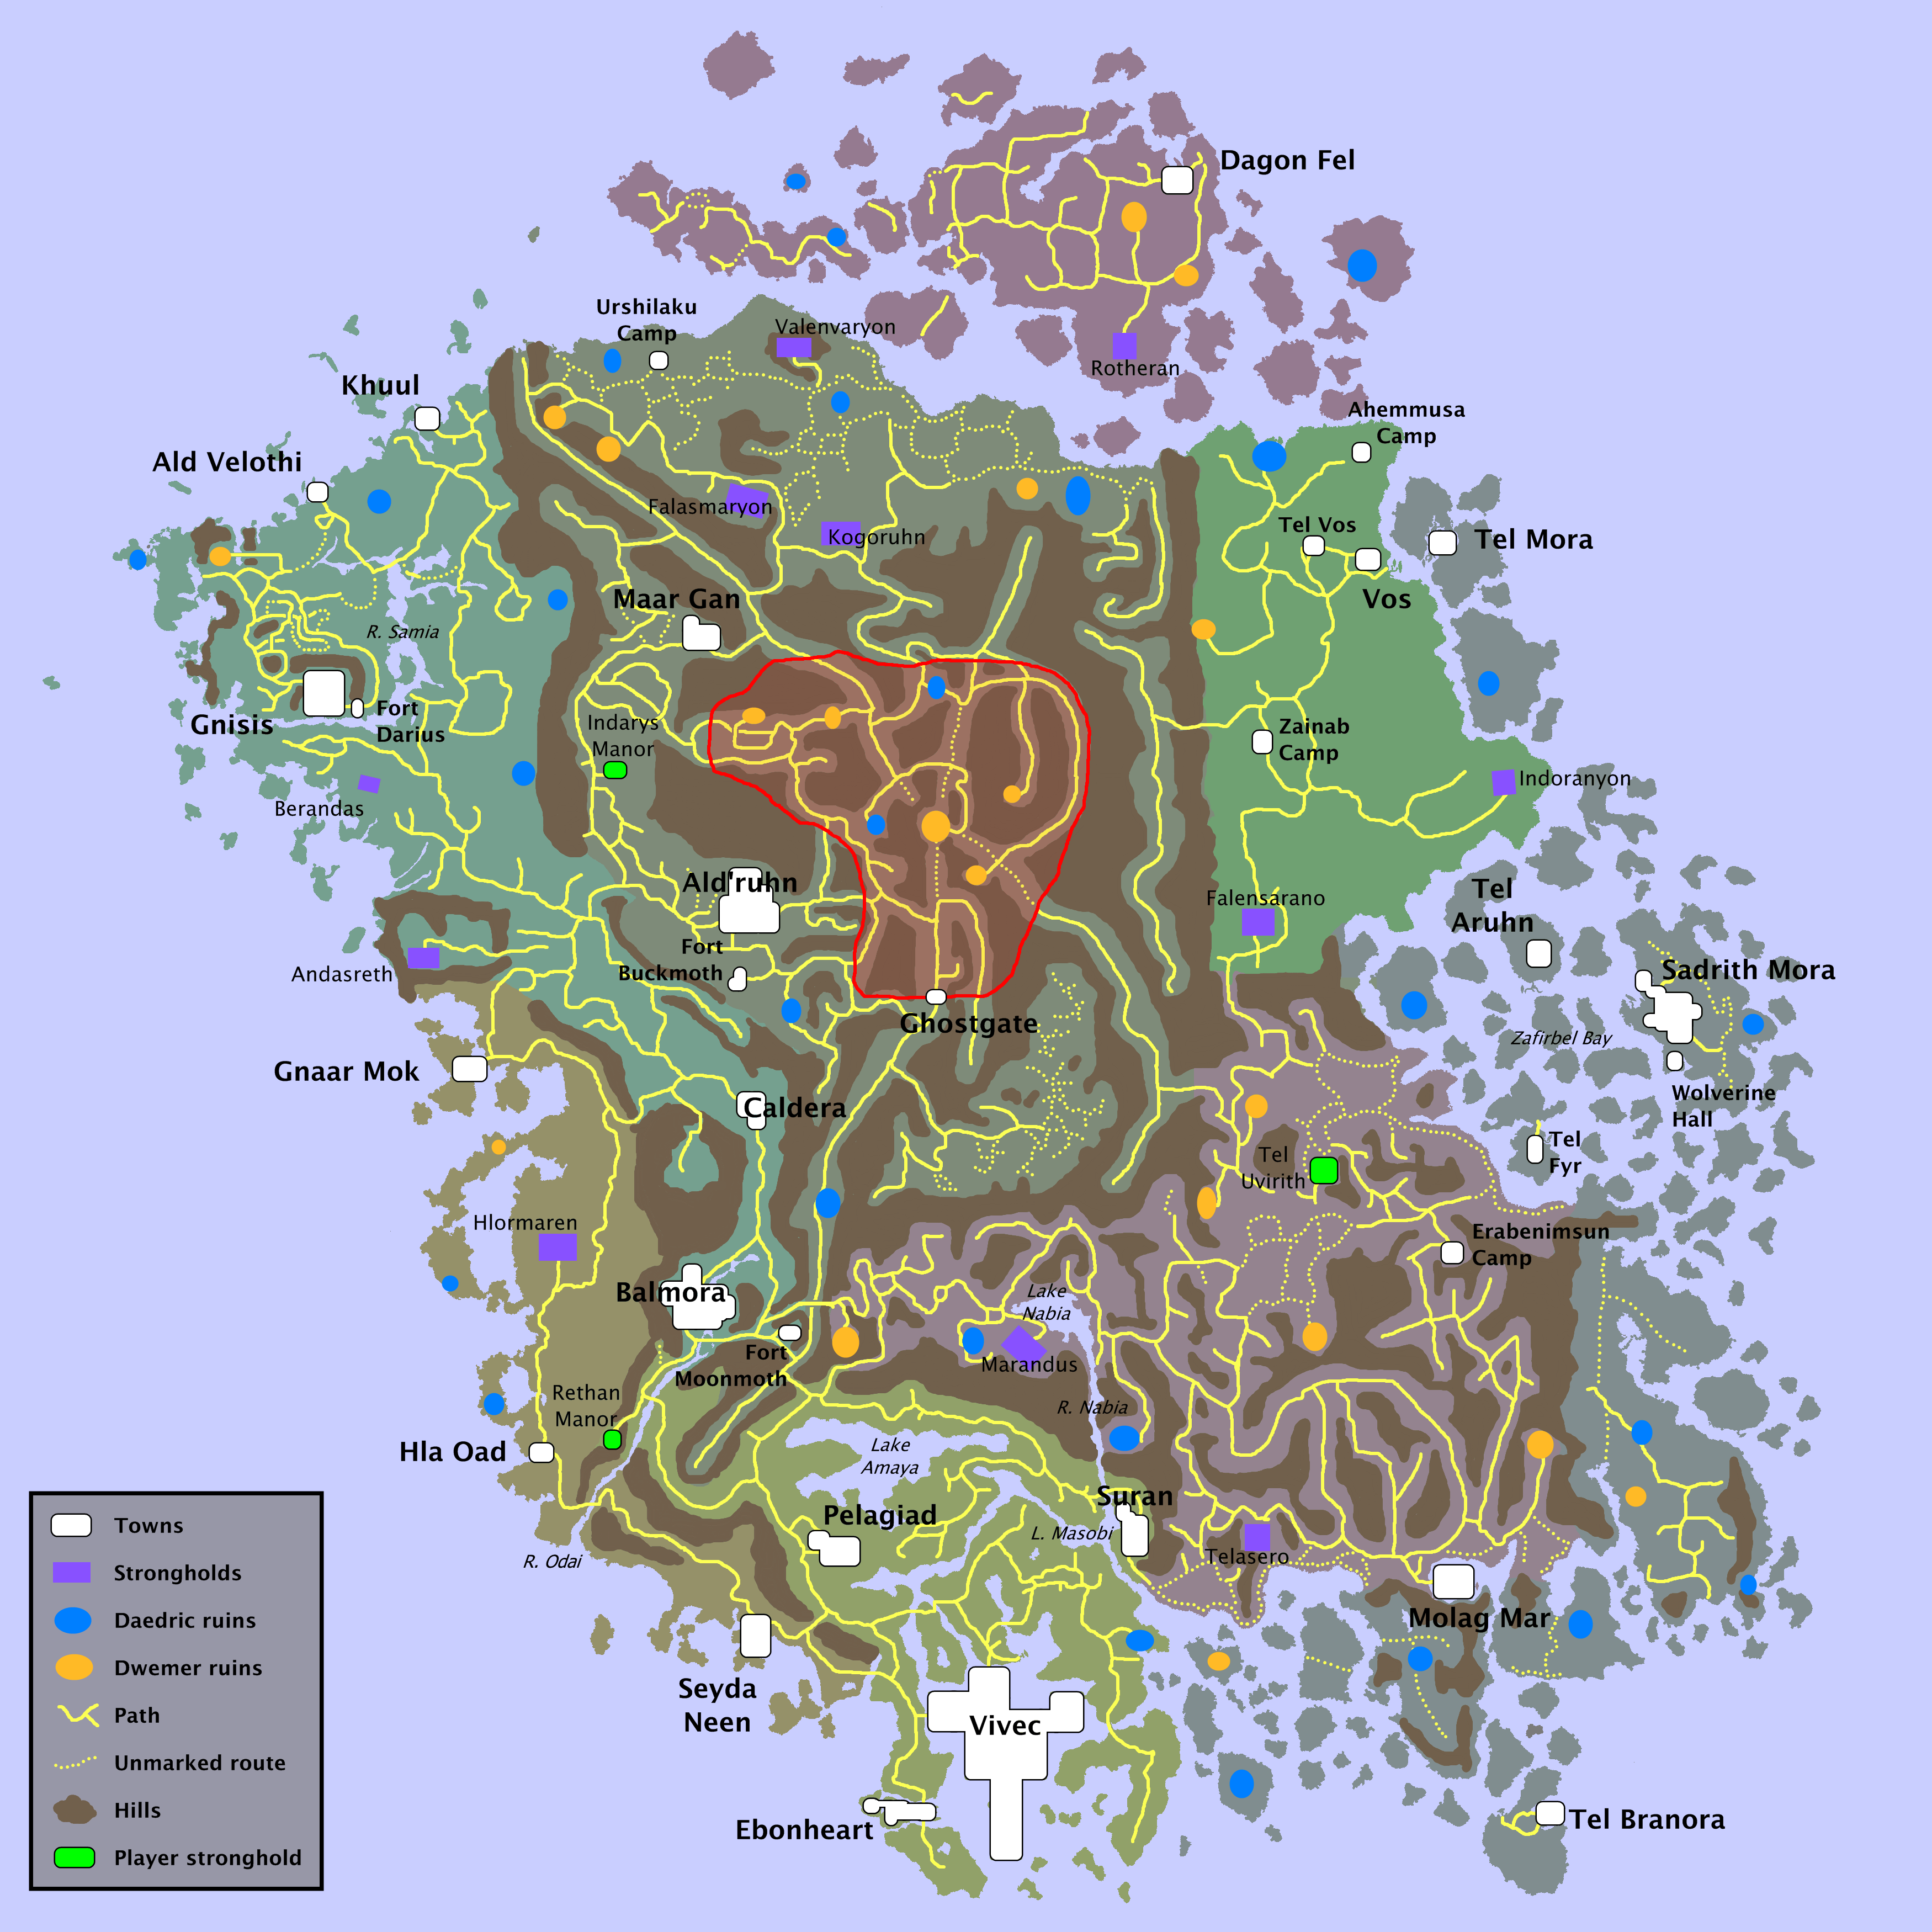 Anyone got a map with all locations for Dwemer ruins? : r/Morrowind